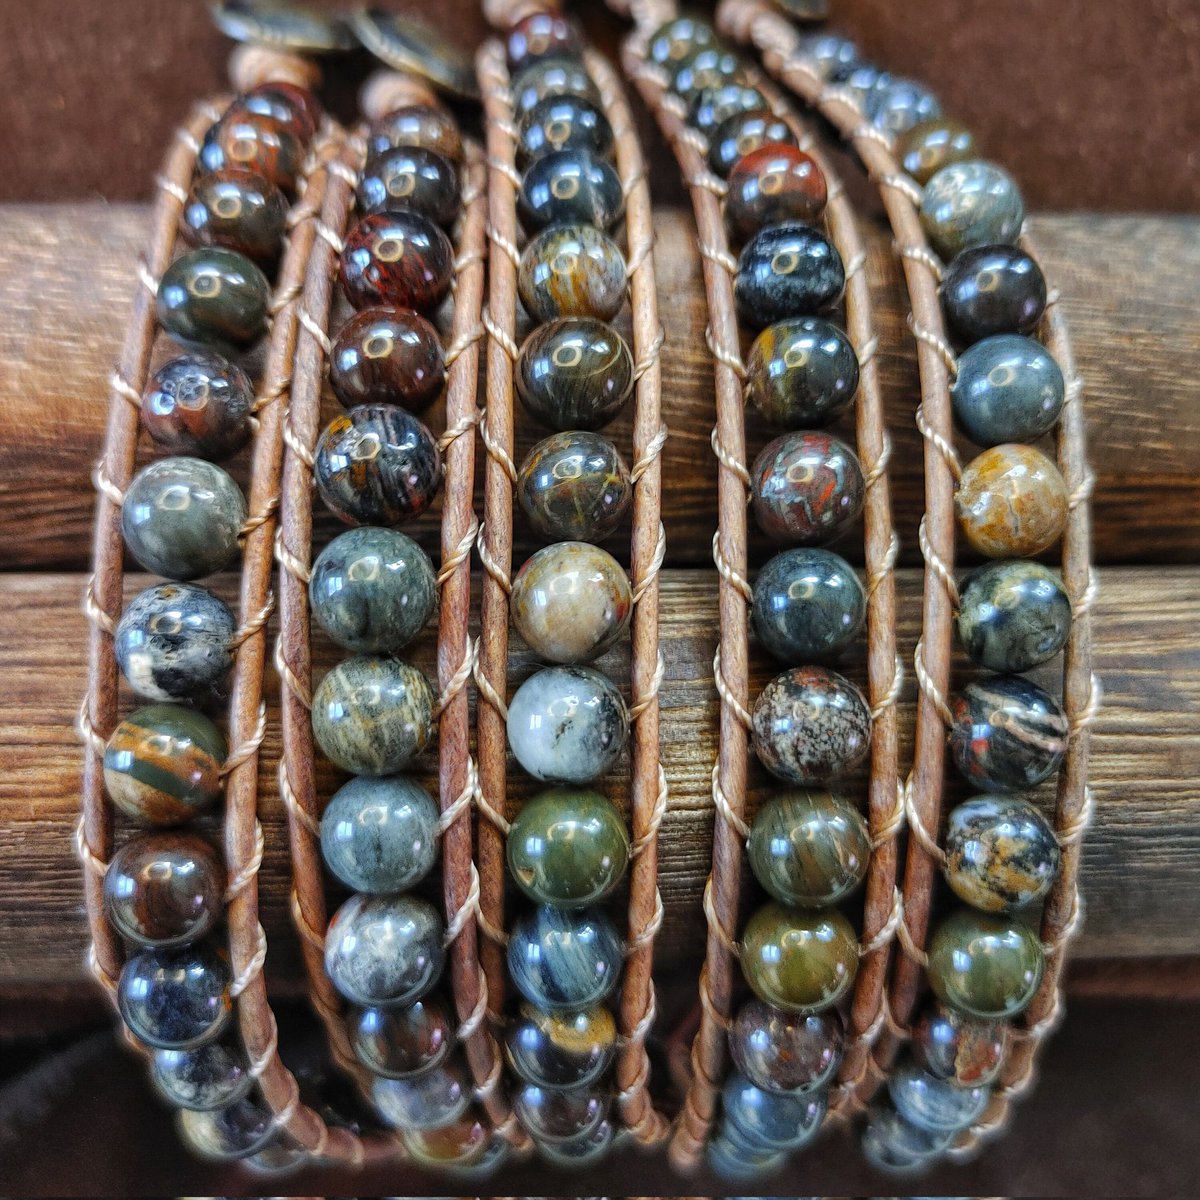 These are a #personal #favorite
Brecciated Jasper - Made to fit a larger wrist, sizes 7.5 - 9 inches.

#PleaseShare #smallbusinessbigdreams #handmadejewelry #handmadegifts #giftideas #giftsforall #uniquegifts #uniquegiftideas  #crystals #jasper #nature #personalizedgifts